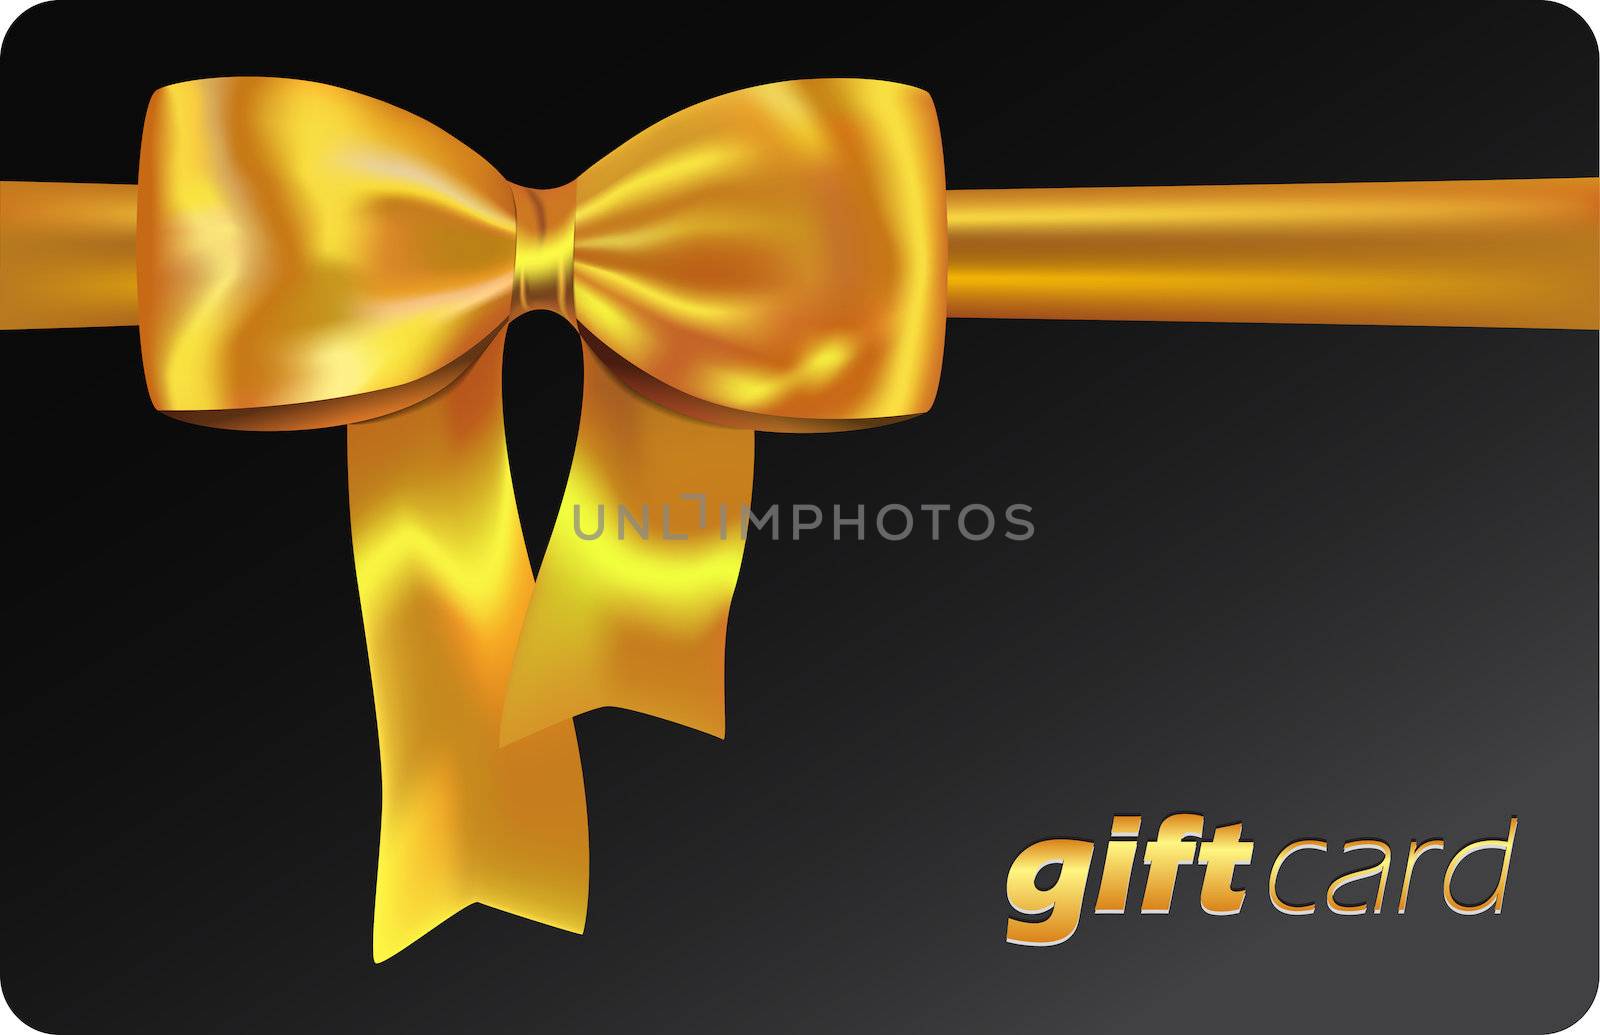 Black gift card with golden ribbon and bow. Vector illustration